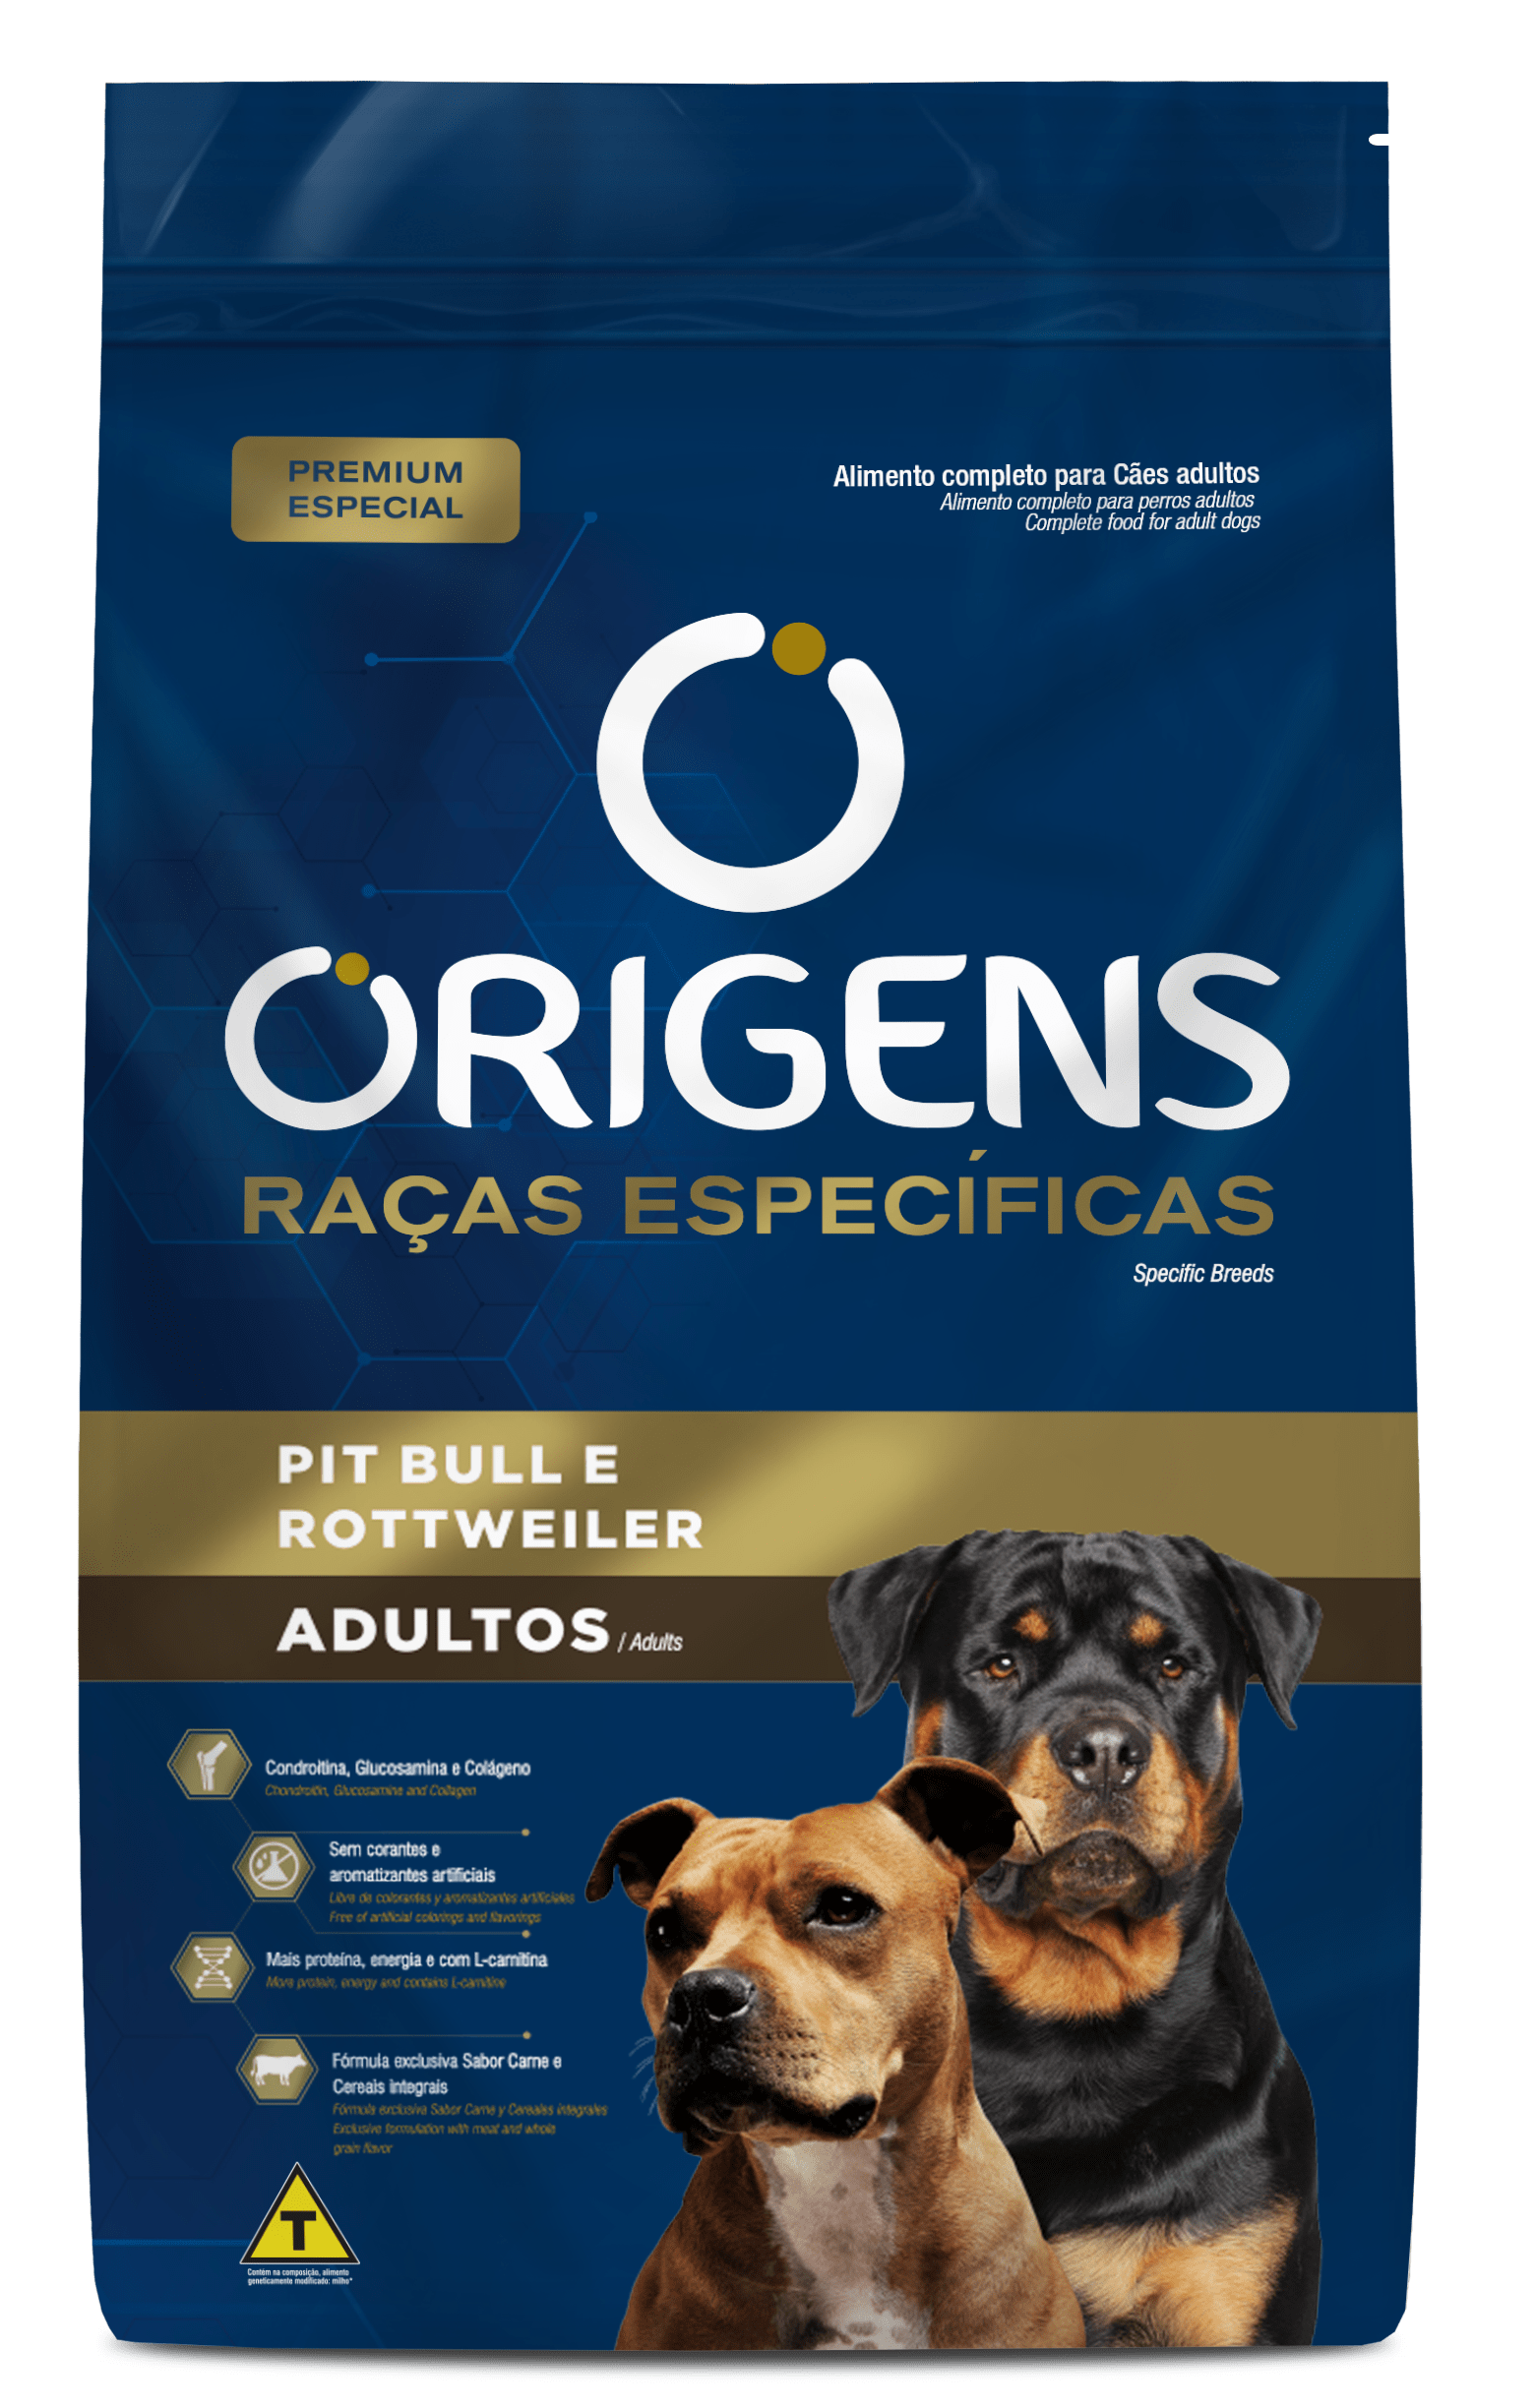 Origens Premium Especial Specific Breeds Adult Dogs Pit Bull and Rottweiler